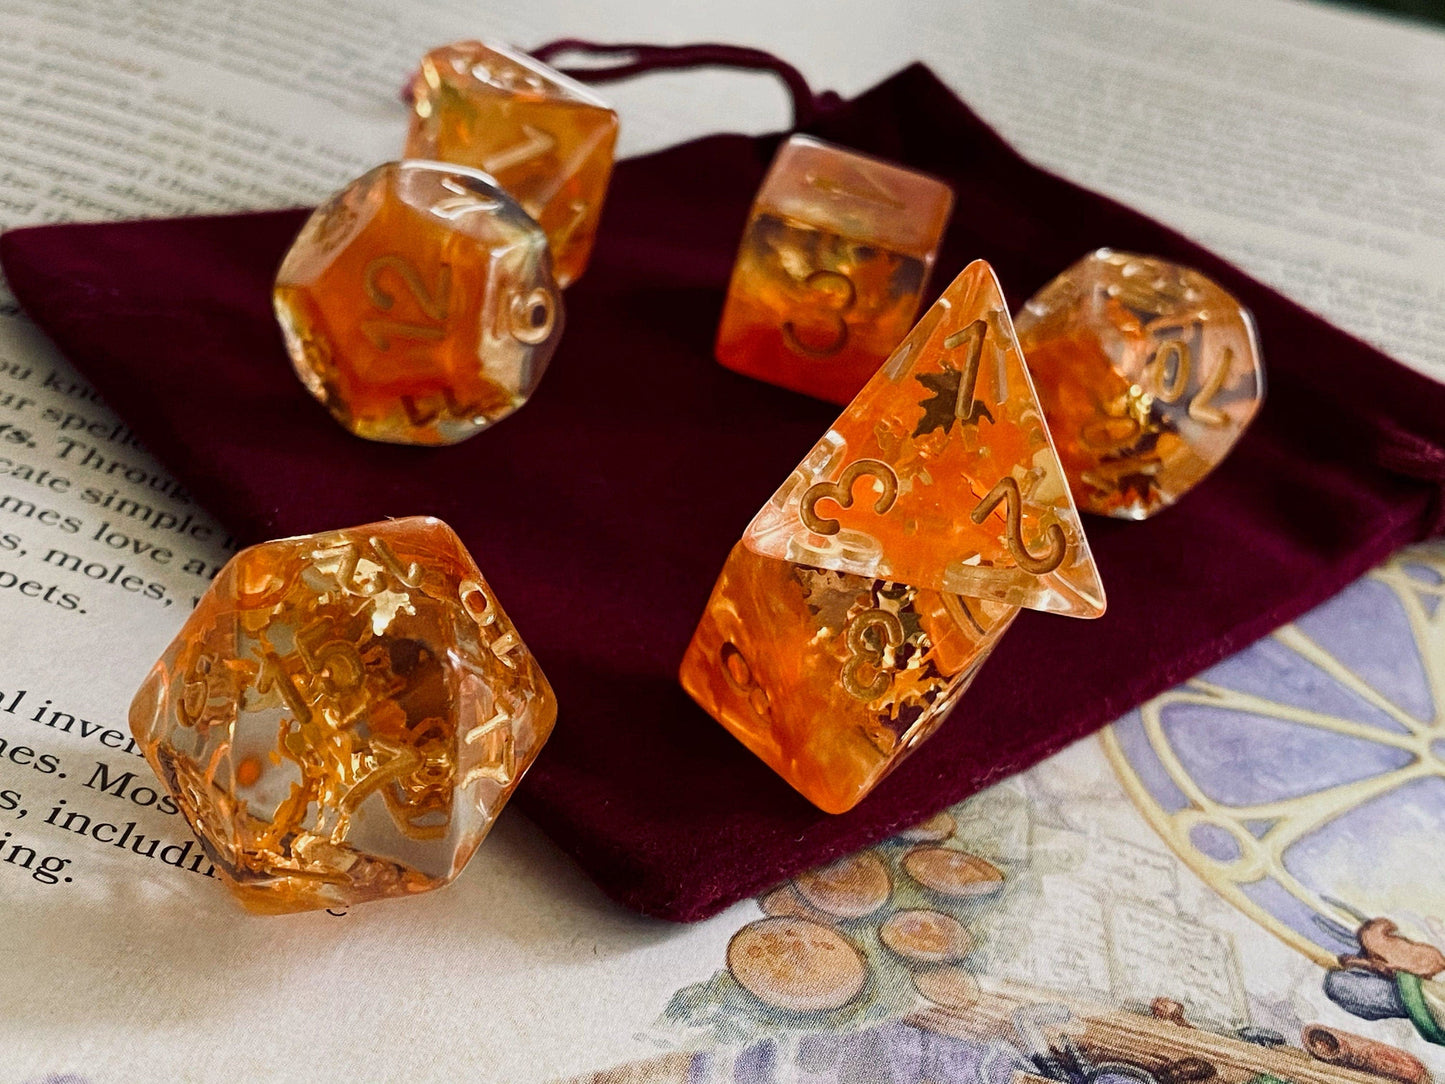 The Crooked Tavern Dice Sets Fall Leaves RPG Dice Set | Falling Leaves Inside!